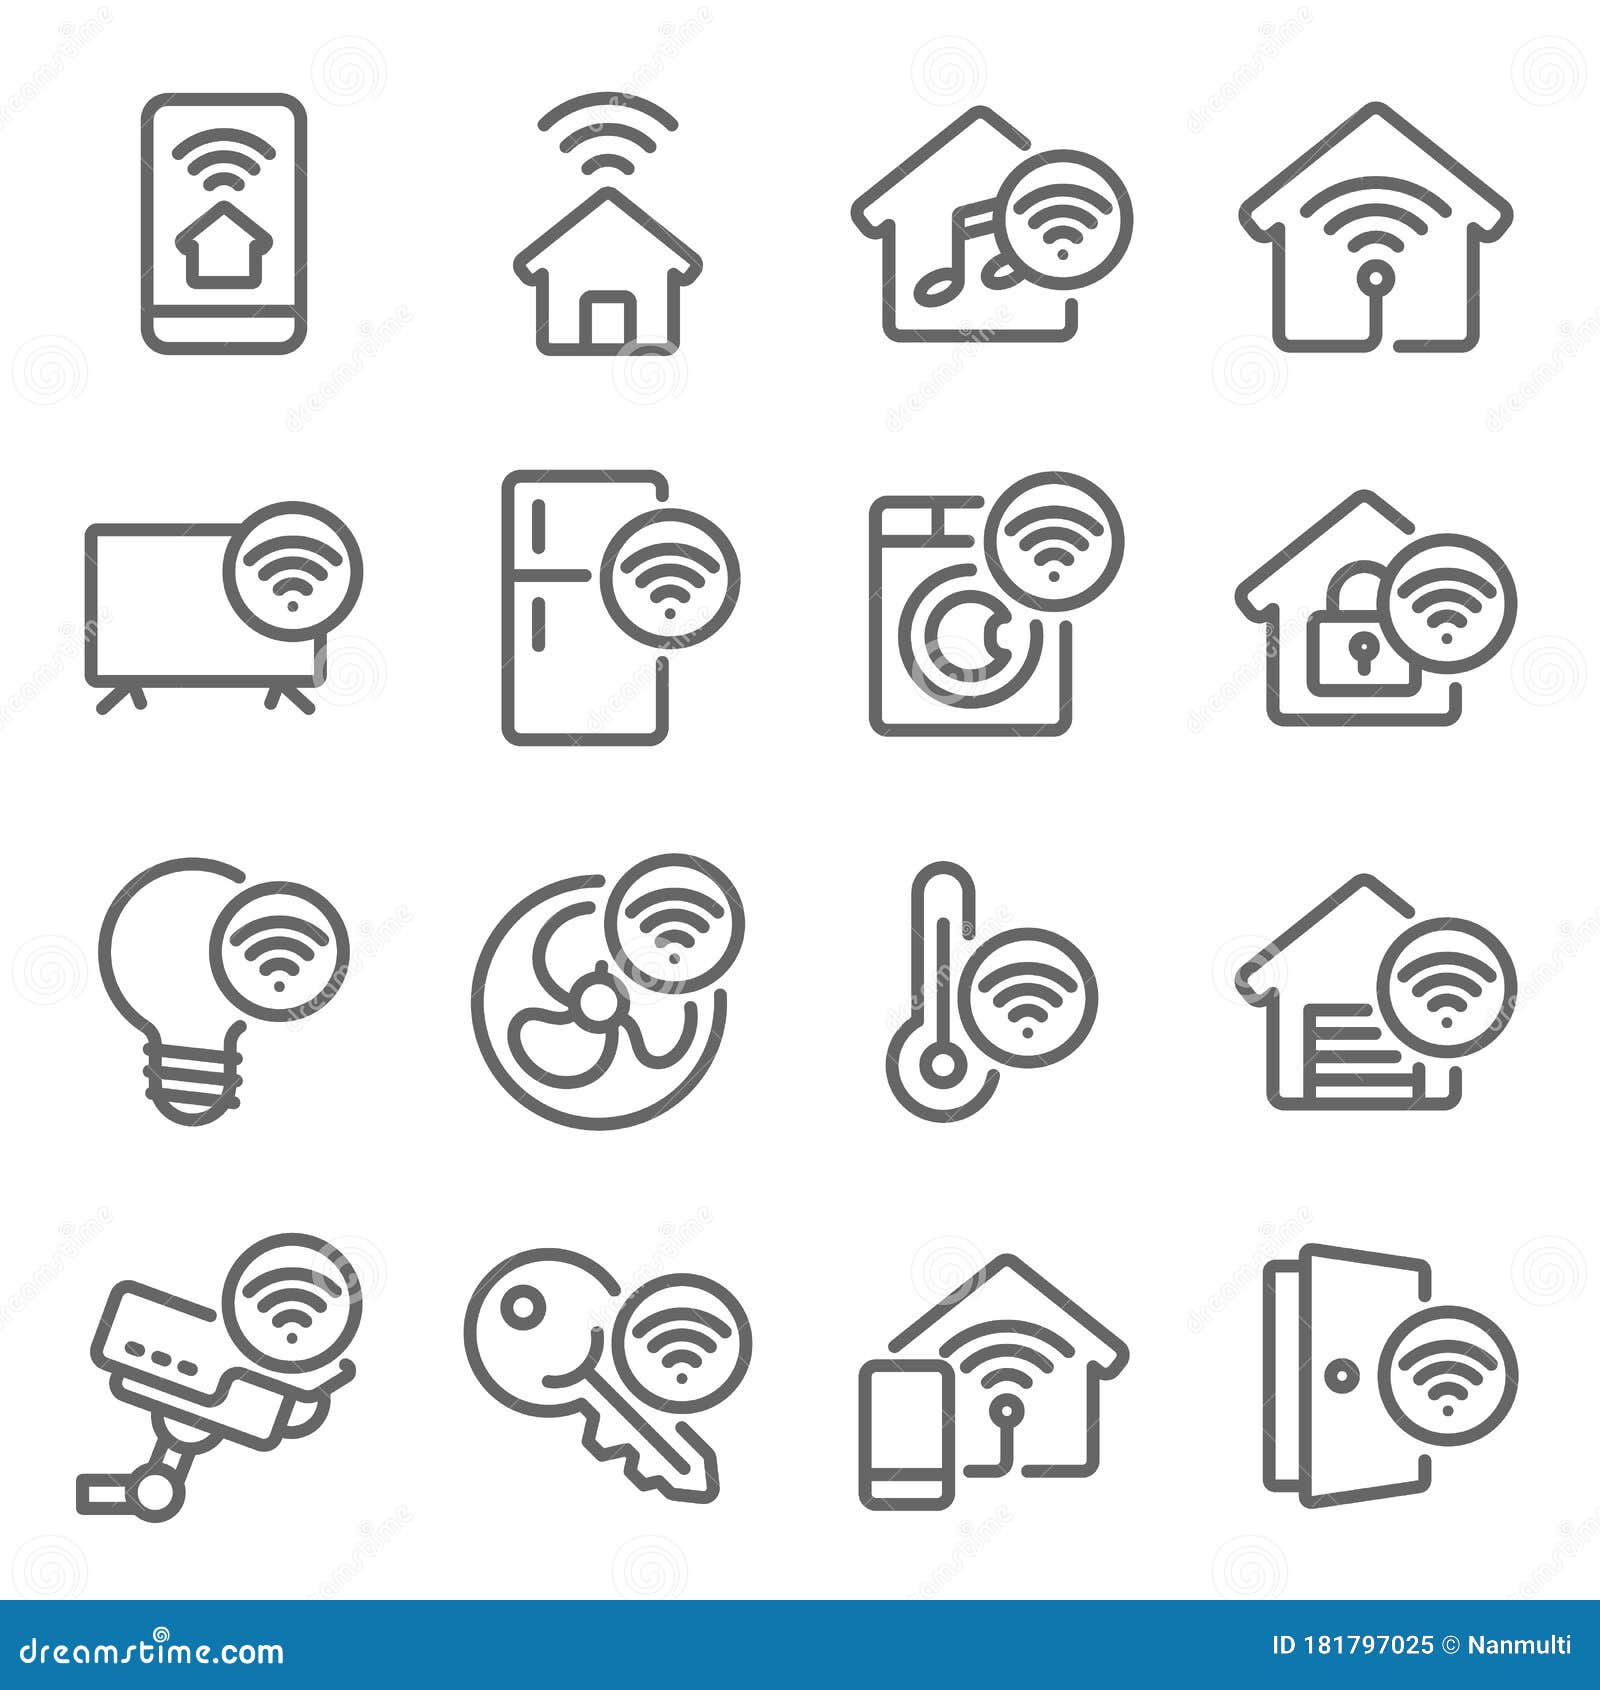 smart home icon set  . contains such icon as smart tv, smart light, safety house, temperature control, electric